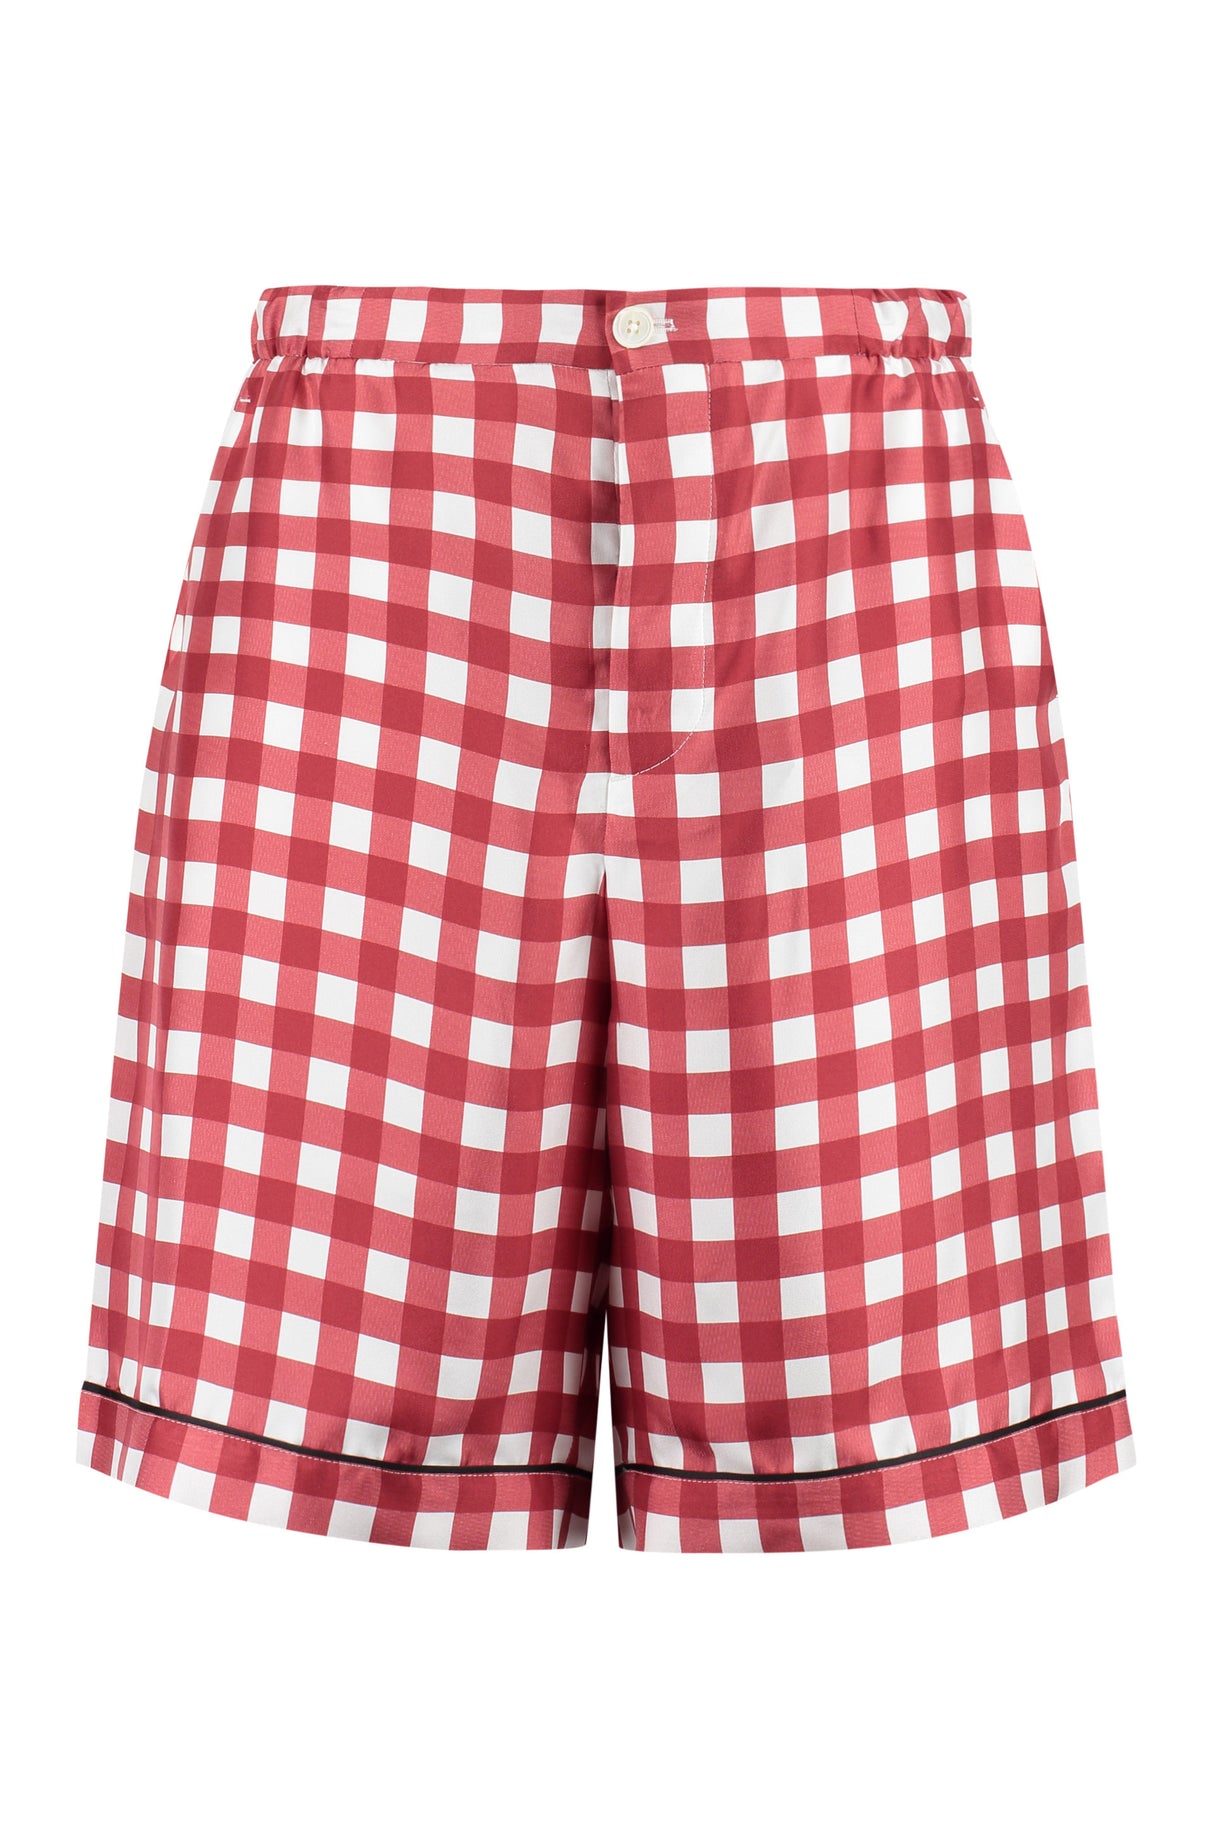 PRADA Red Printed Check Silk Shorts for Men - SS23 Collection